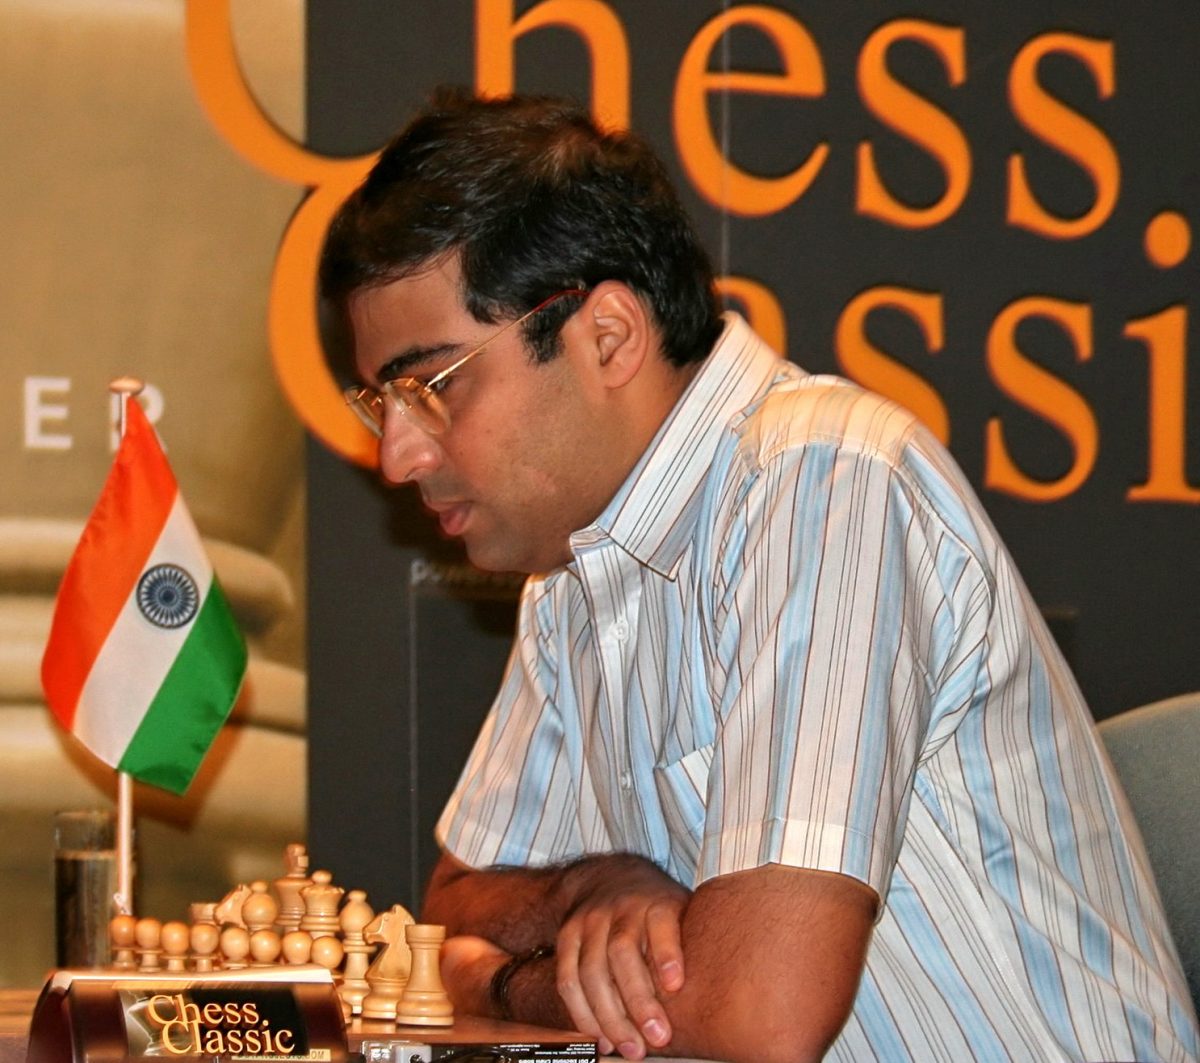 Chess Legend Viswanathan Anand Plays in Recent Tournament